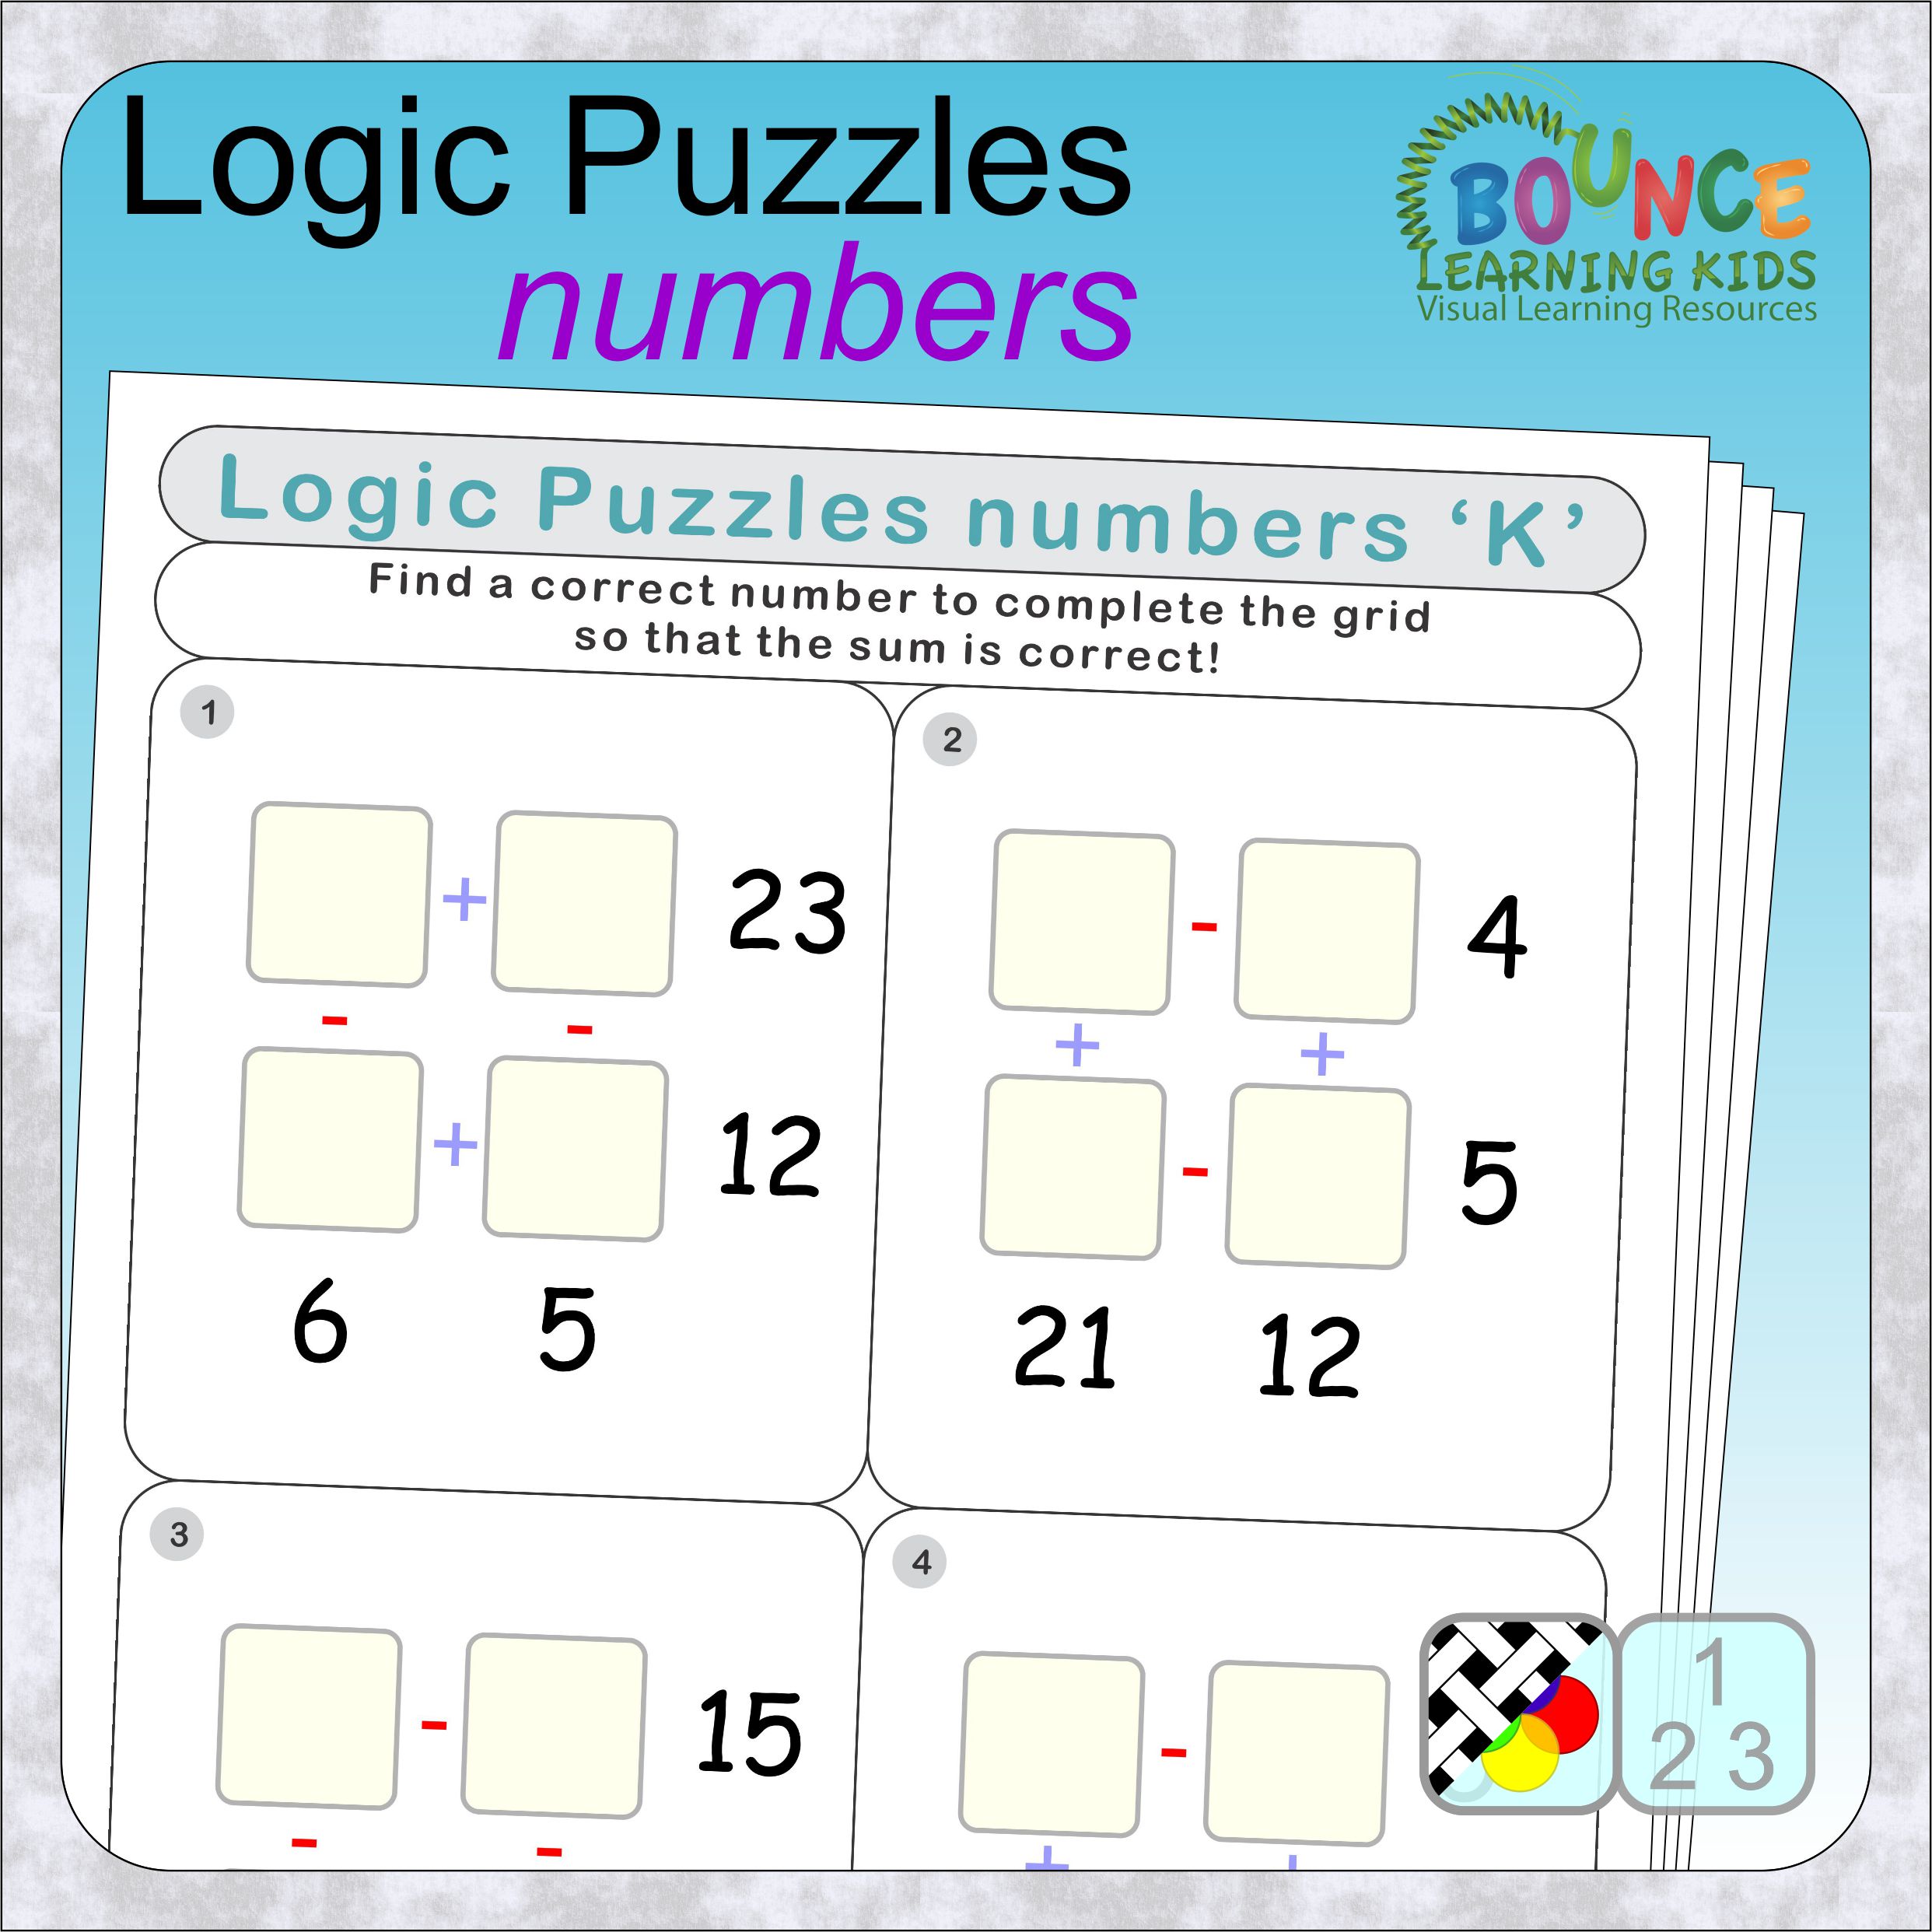 4-fun-logic-puzzles-numbers-worksheets-series-to-download